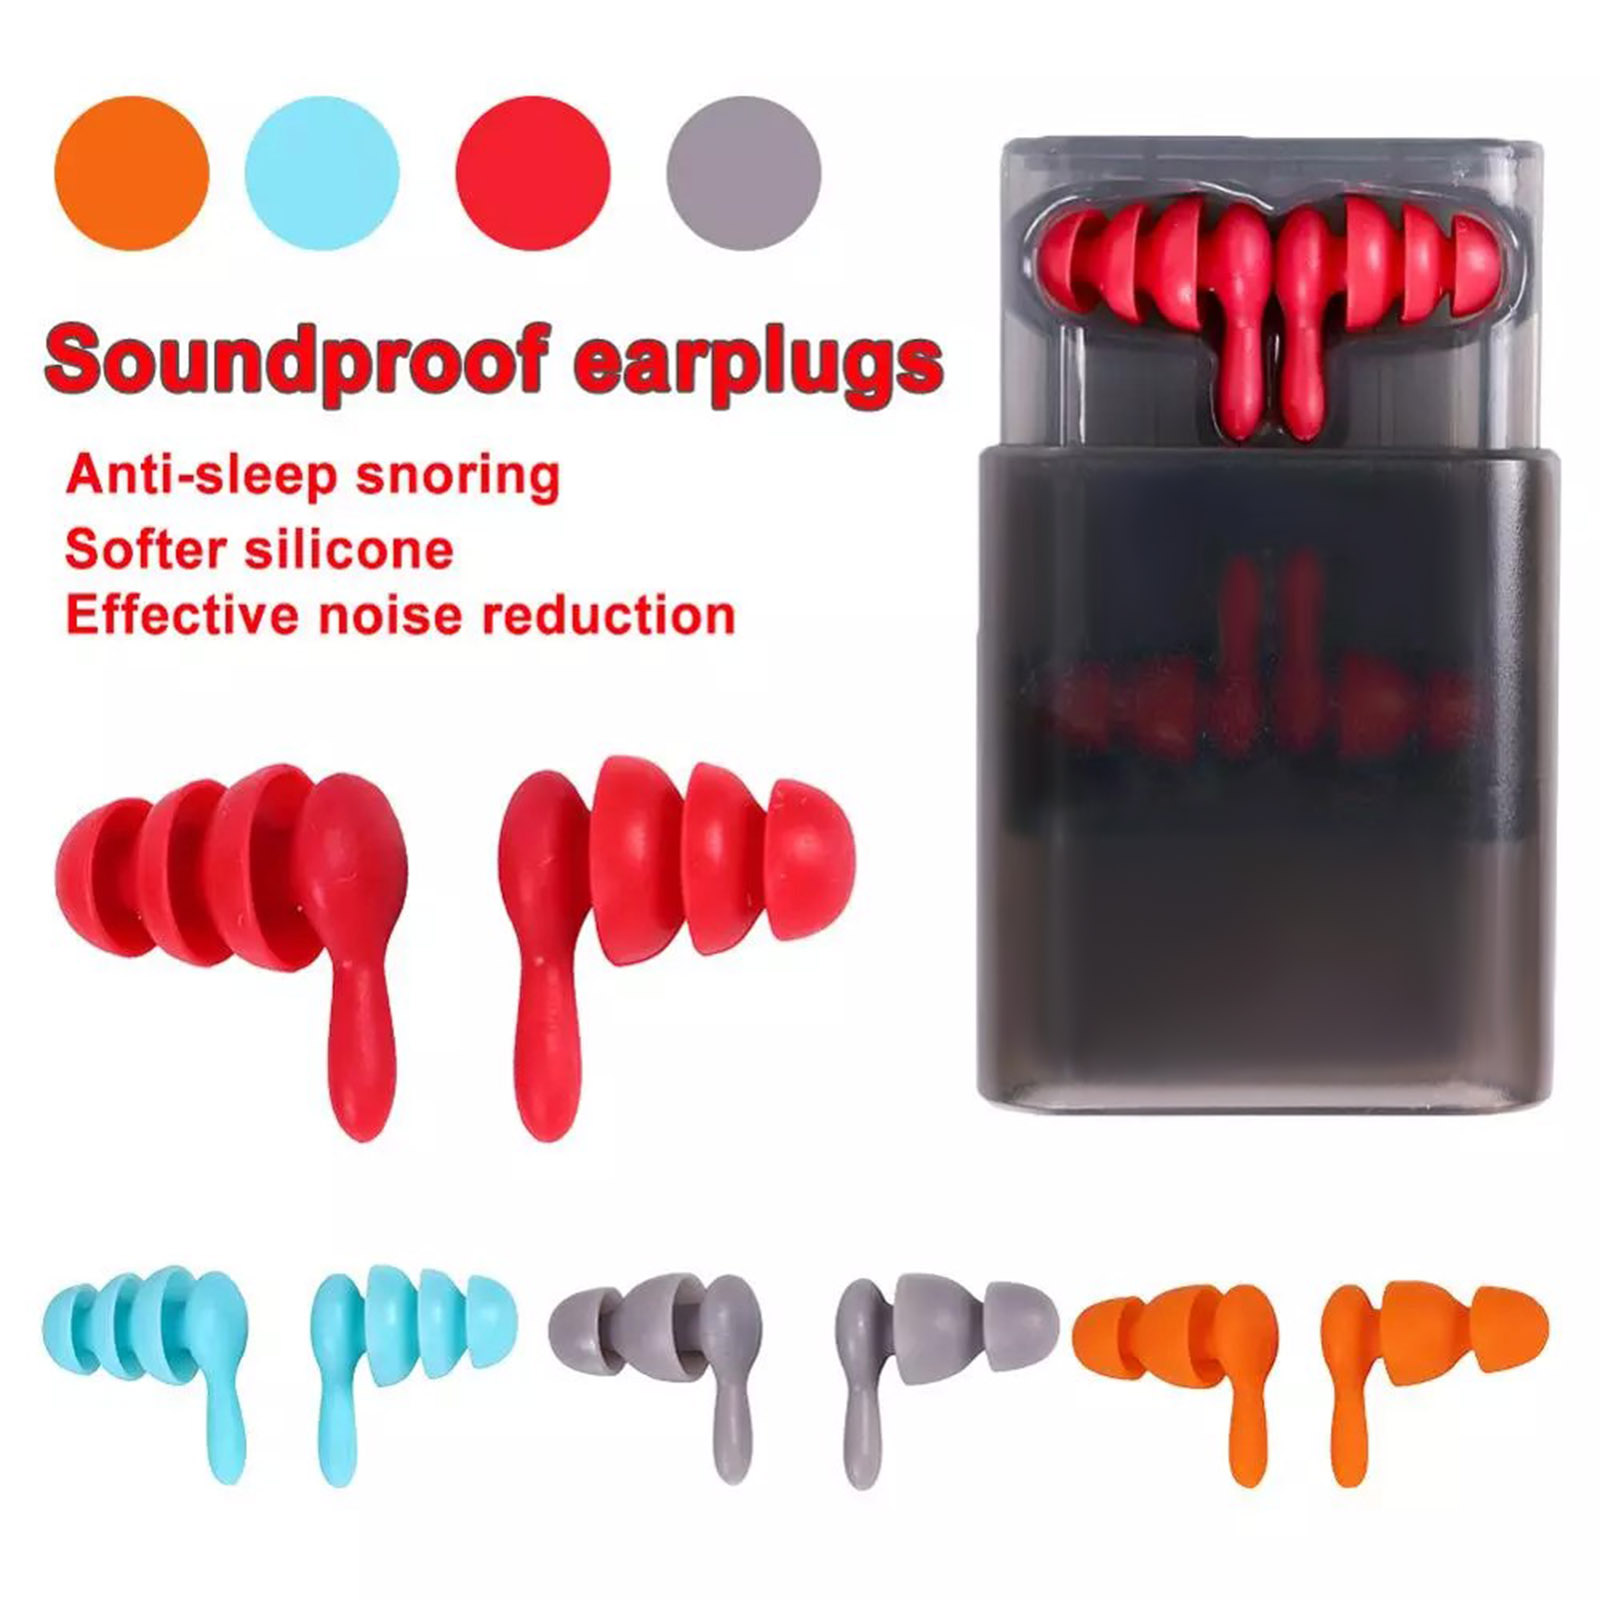 2 Sizes White Silicone Reusable Noise Cancelling Ear Plugs Hearing Protection Noise Reducing Ear Care Product for Sleeping Travelling,4 Colors Optional Set of 4pcs